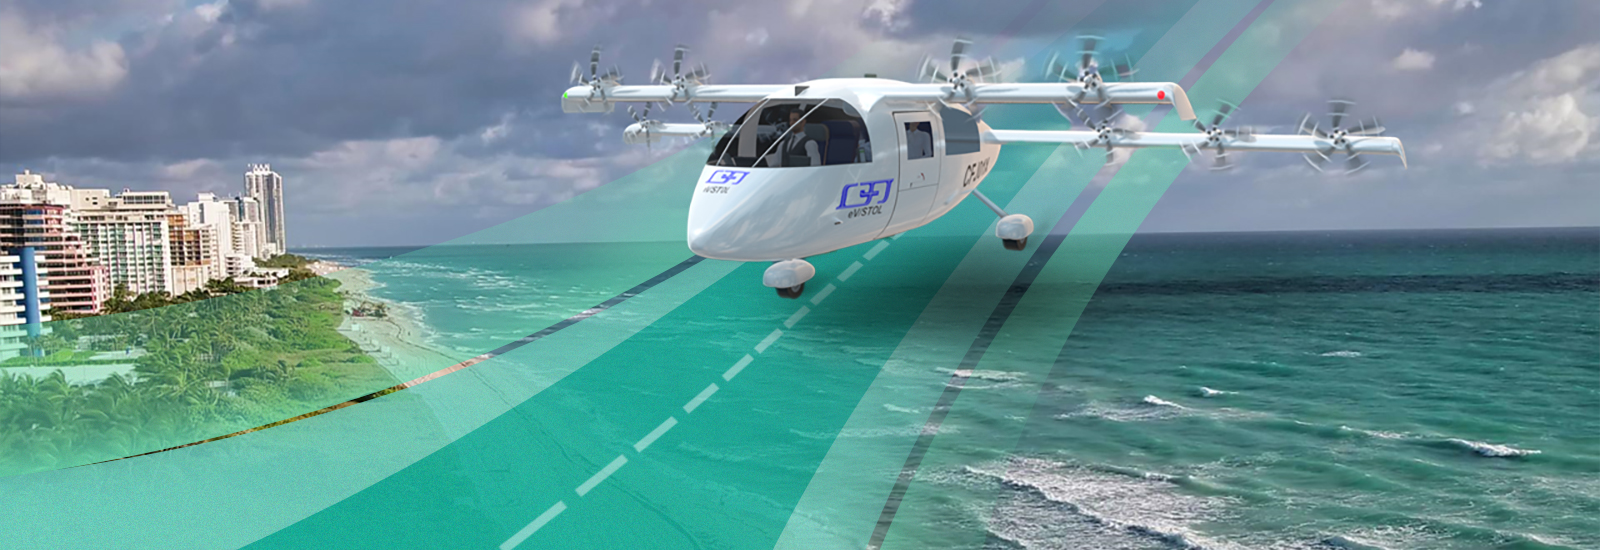 a new College of Engineering initiative that has set its sights on developing a pilotless, electric vertical takeoff and landing (eVTOL) aircraft